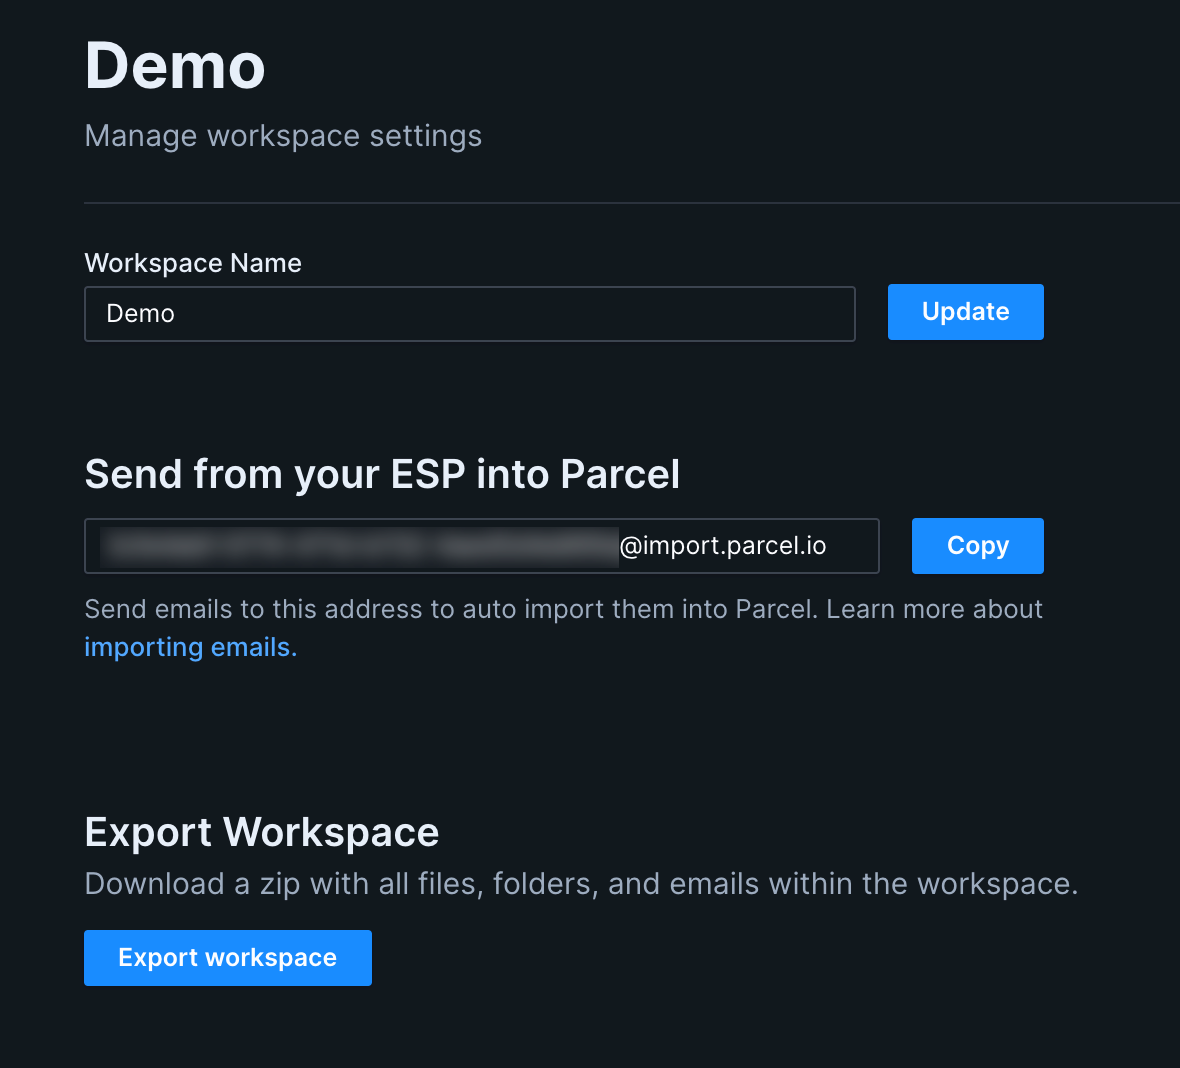 Up close image of the workspace settings page, which has several sections. The last section, titled "Export Workspace" includes a "Export workspace" button and a description reading "Download a zip with all files, folders, and emails within the workspace."